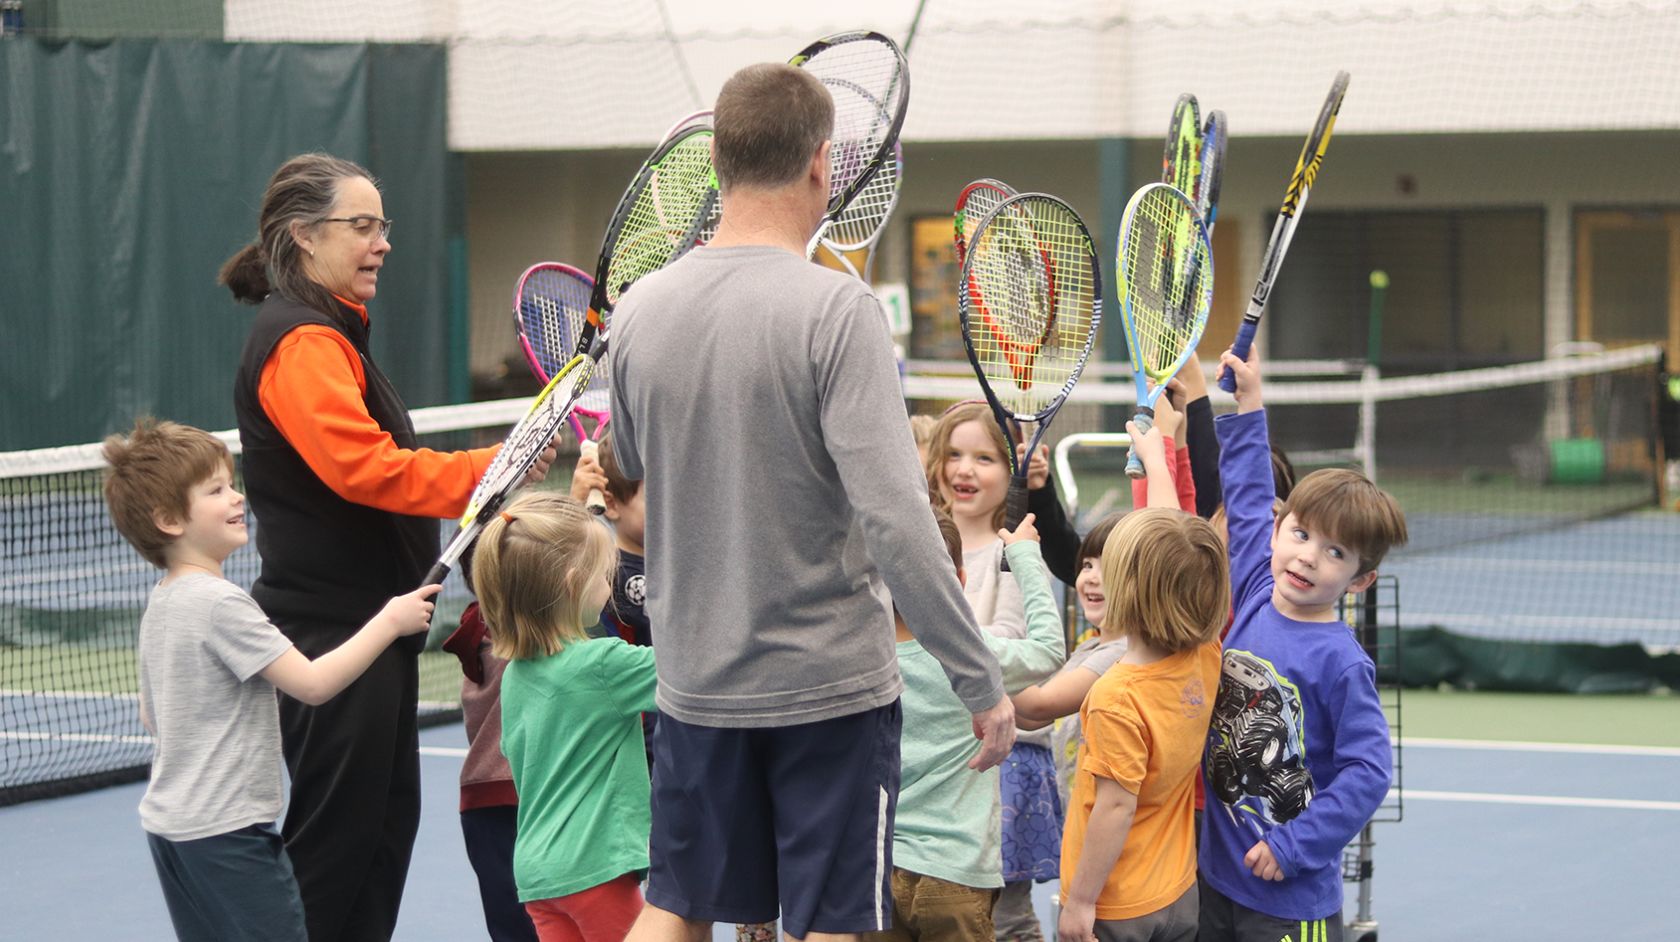 A Group Of Kids Holding Tennis Rackets